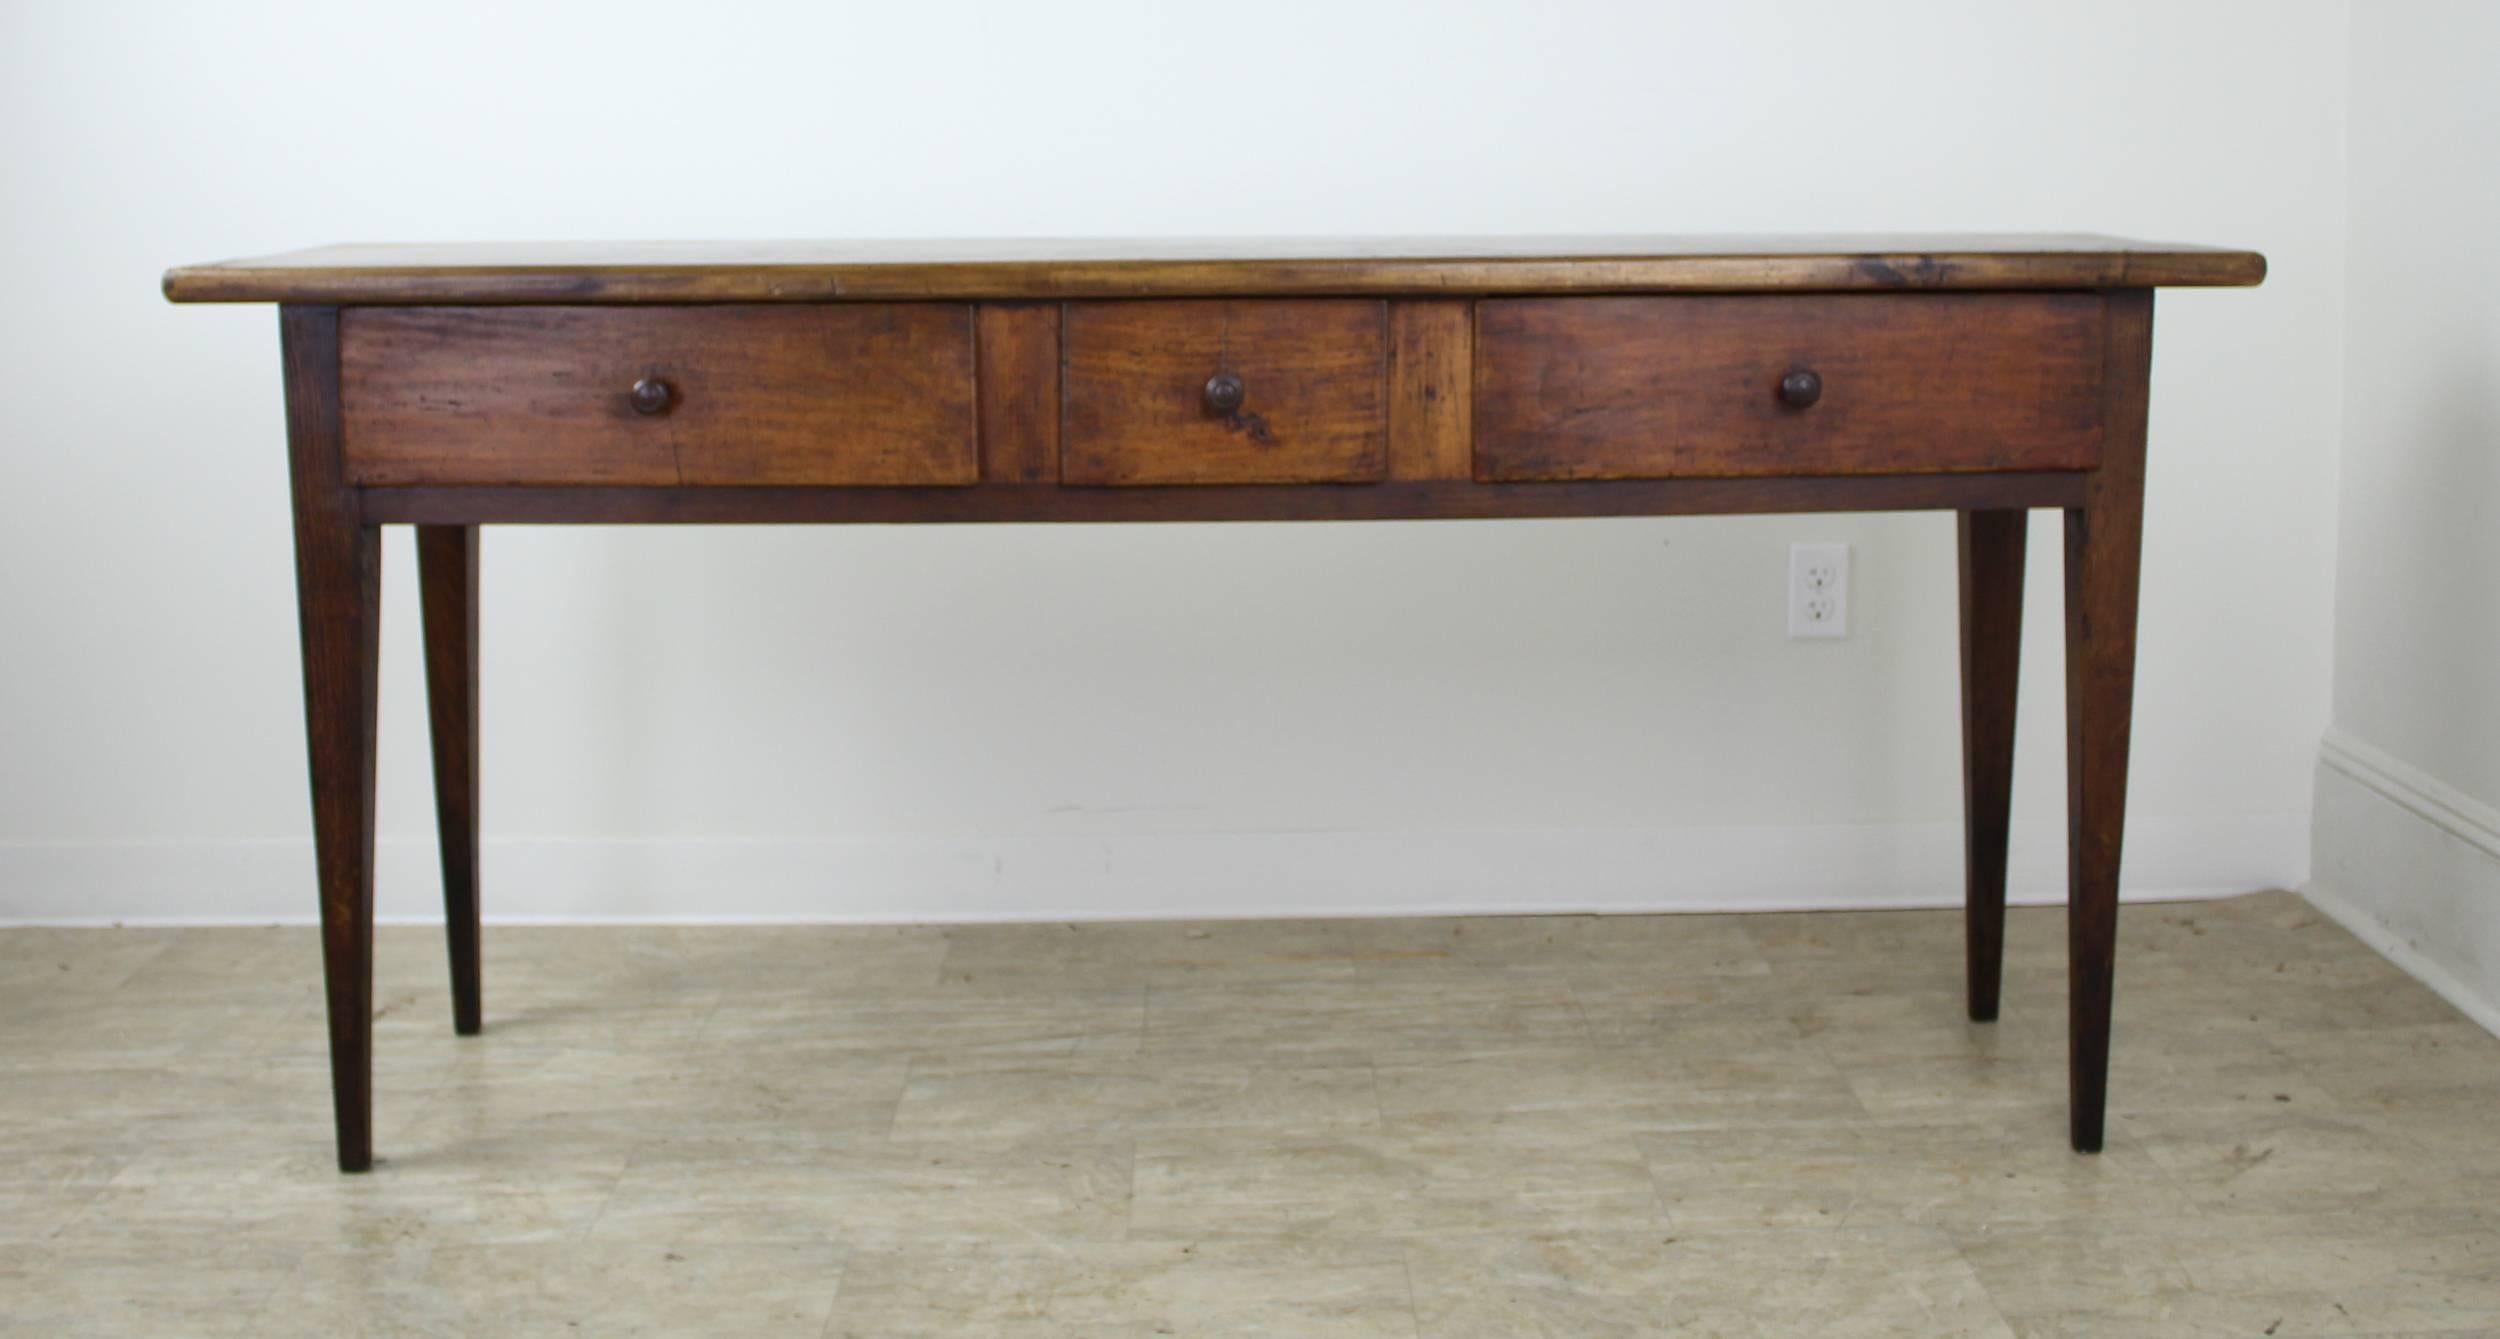 This richly colored poplar piece is a very impressive long console table with some interesting distress on top. Three drawers include a charming small center drawer. Legs are classic long and tapered country style, with sturdy pegs. Though longer,